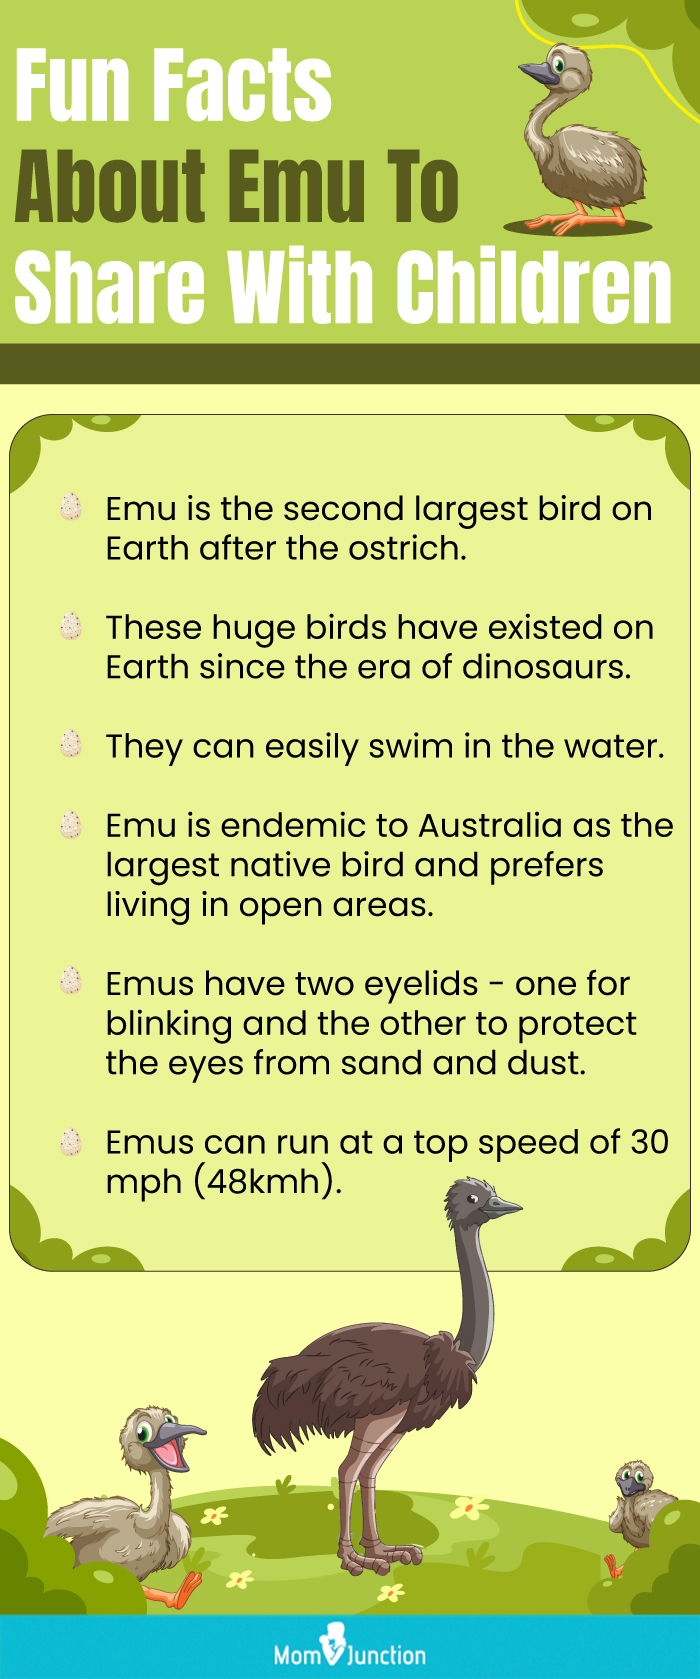 fun facts about emu to share with children (infographic)